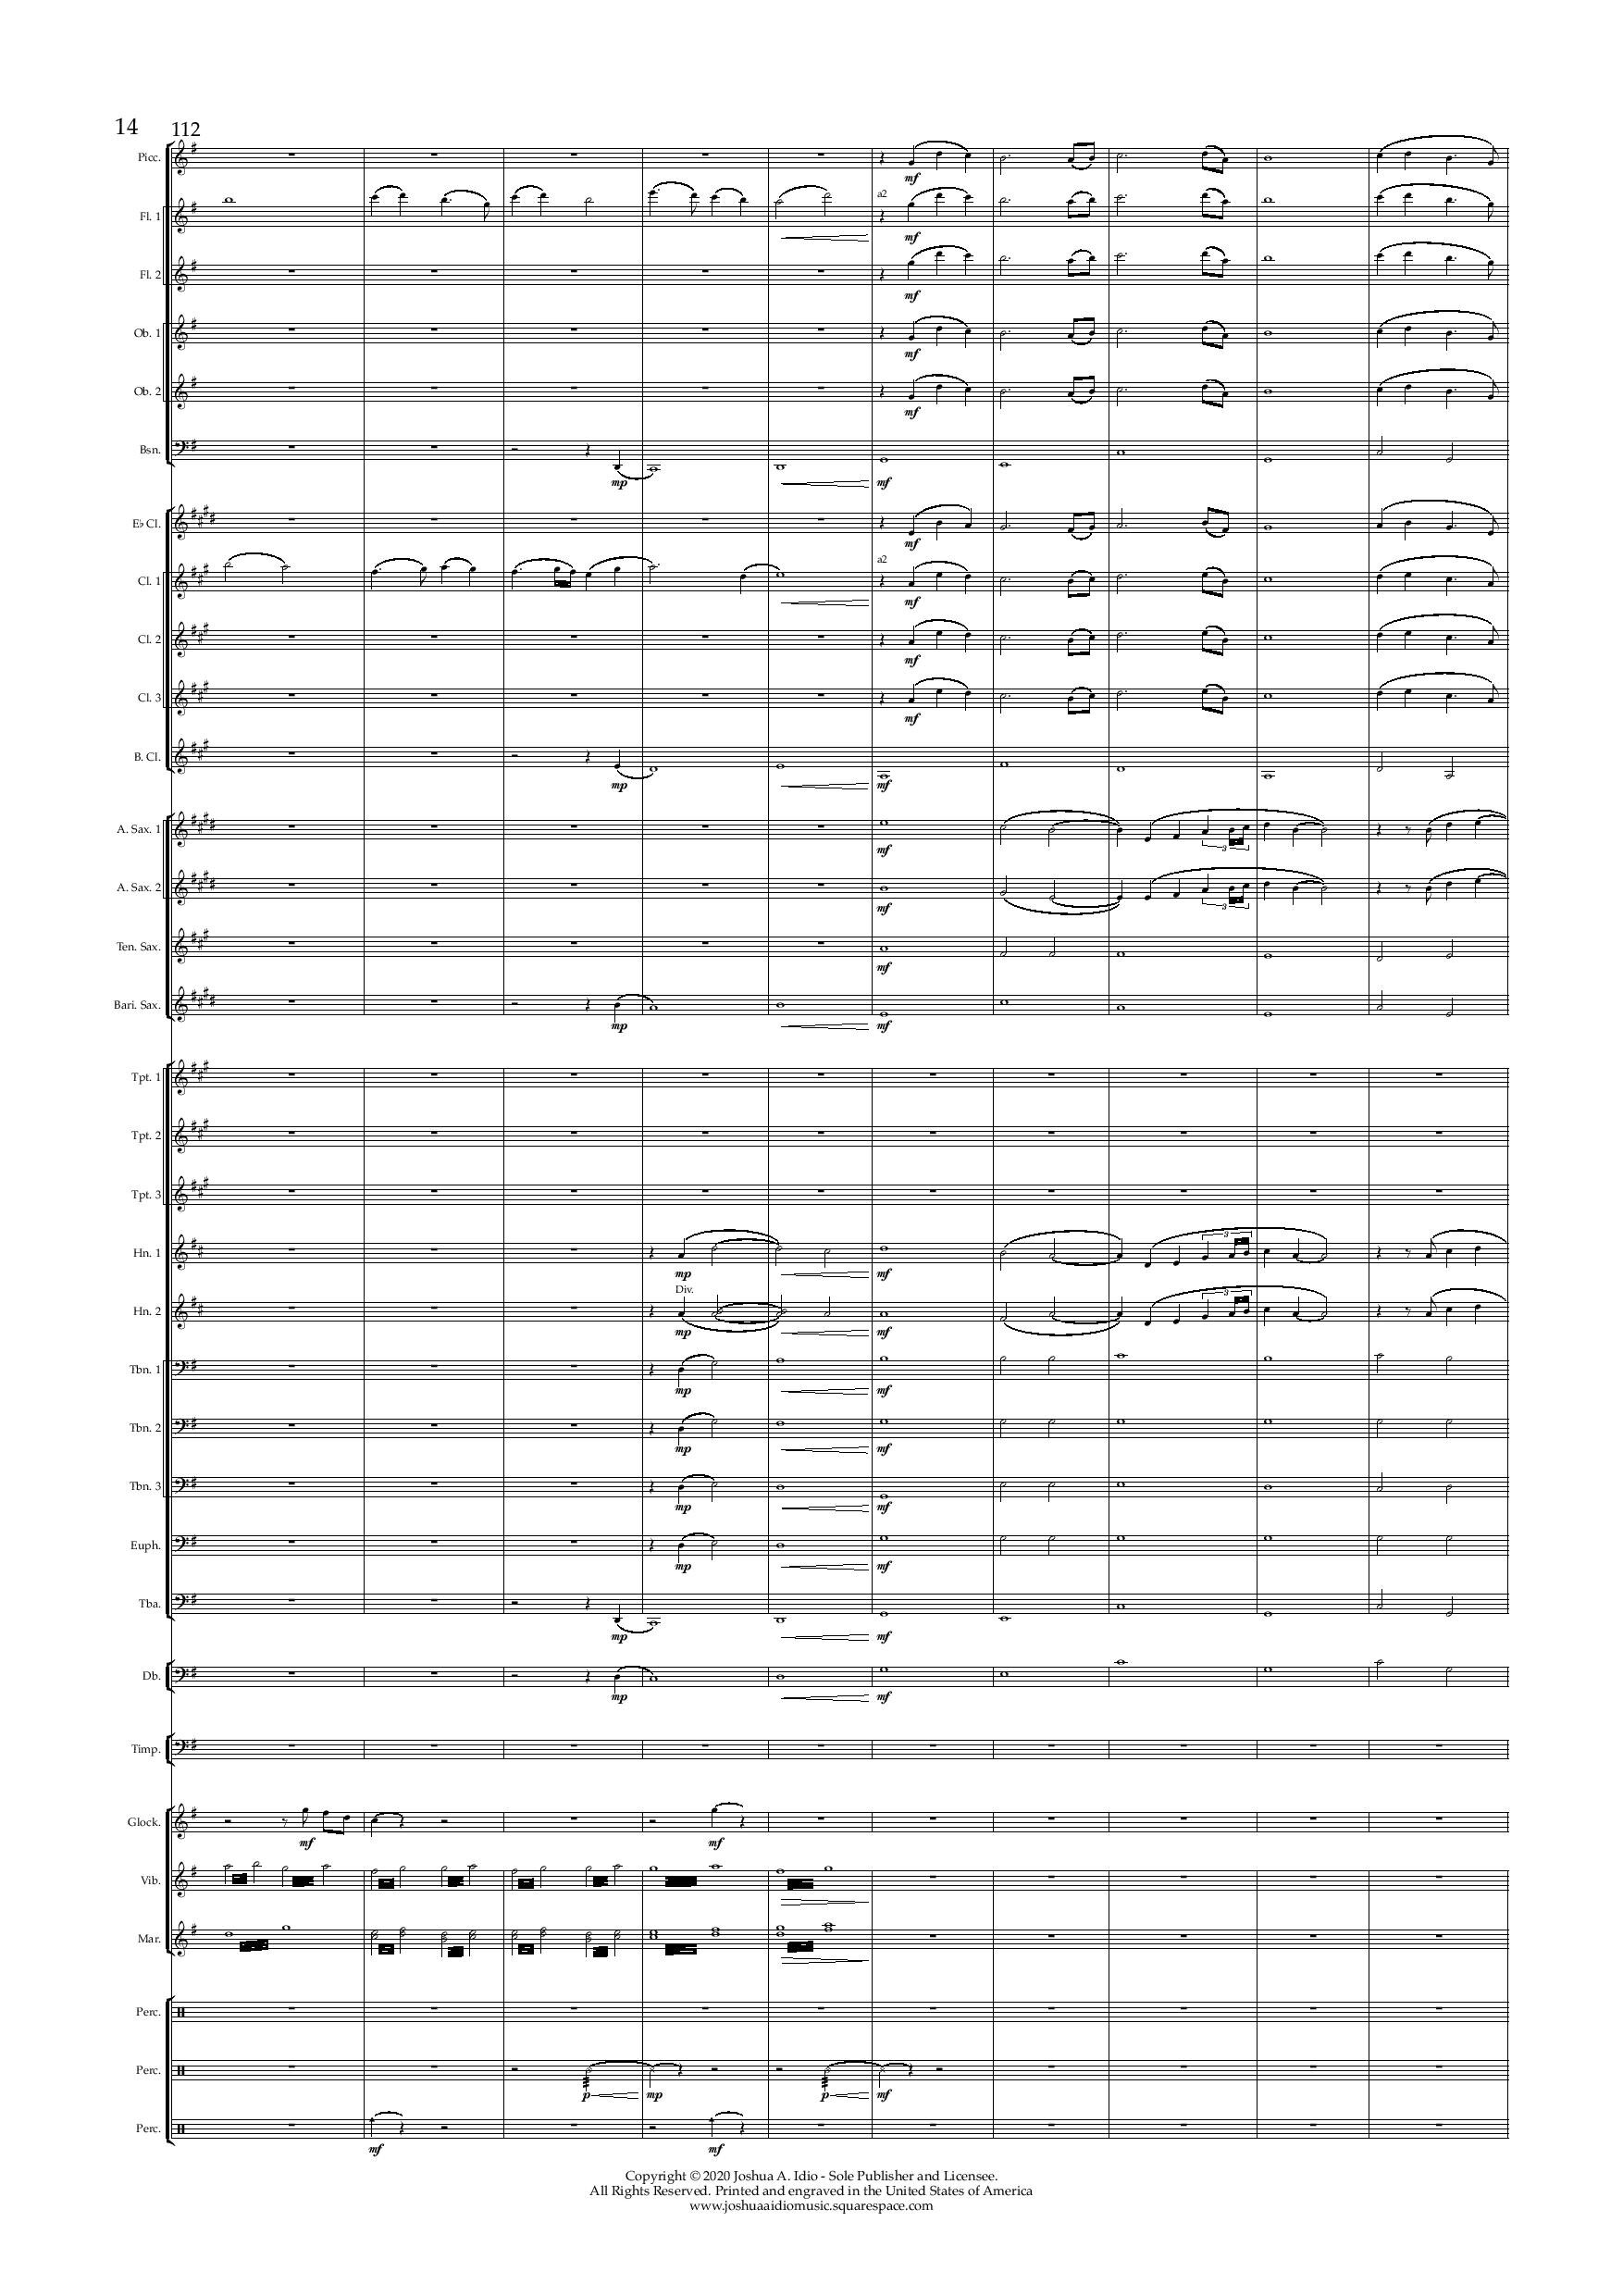 The Cruise Line Dream - Conductor s Score-page-014.jpg